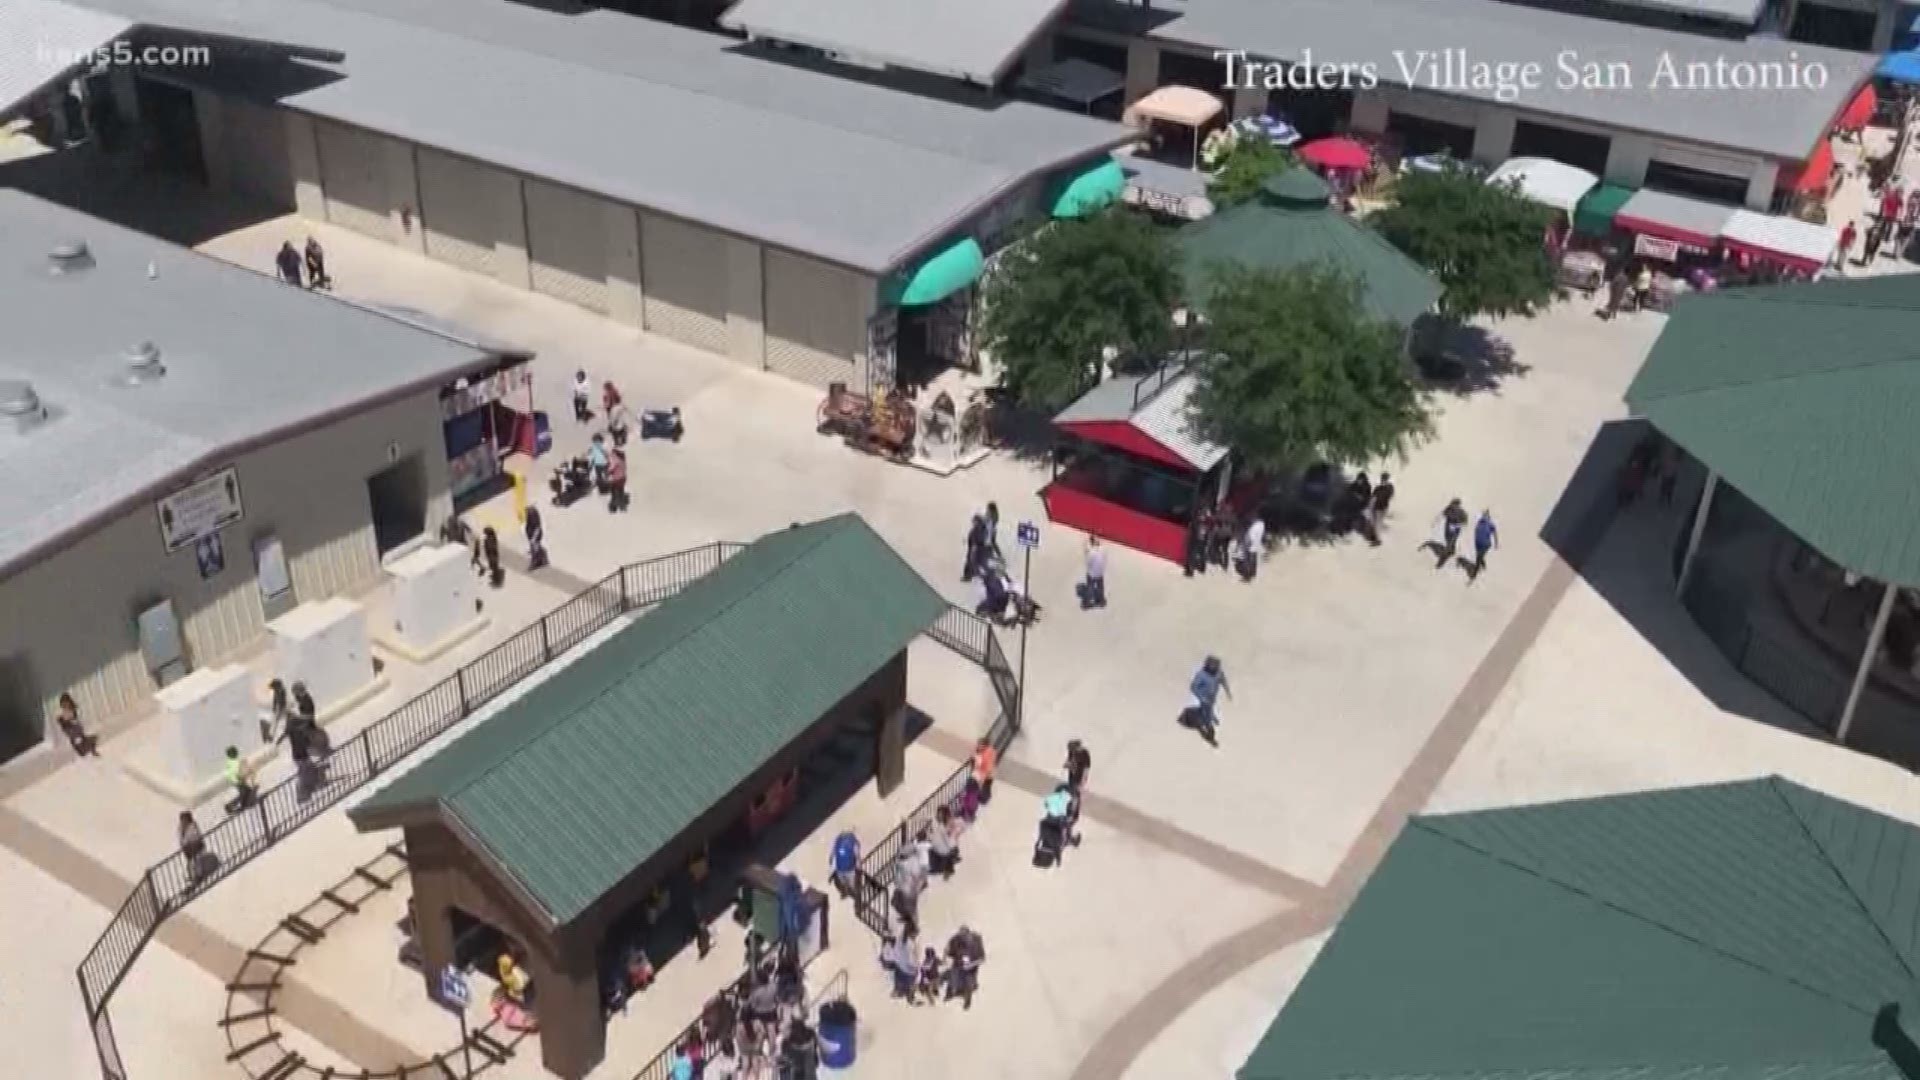 Other Traders Village locations in Texas have been allowed to resume operations. It's a different story in San Antonio.